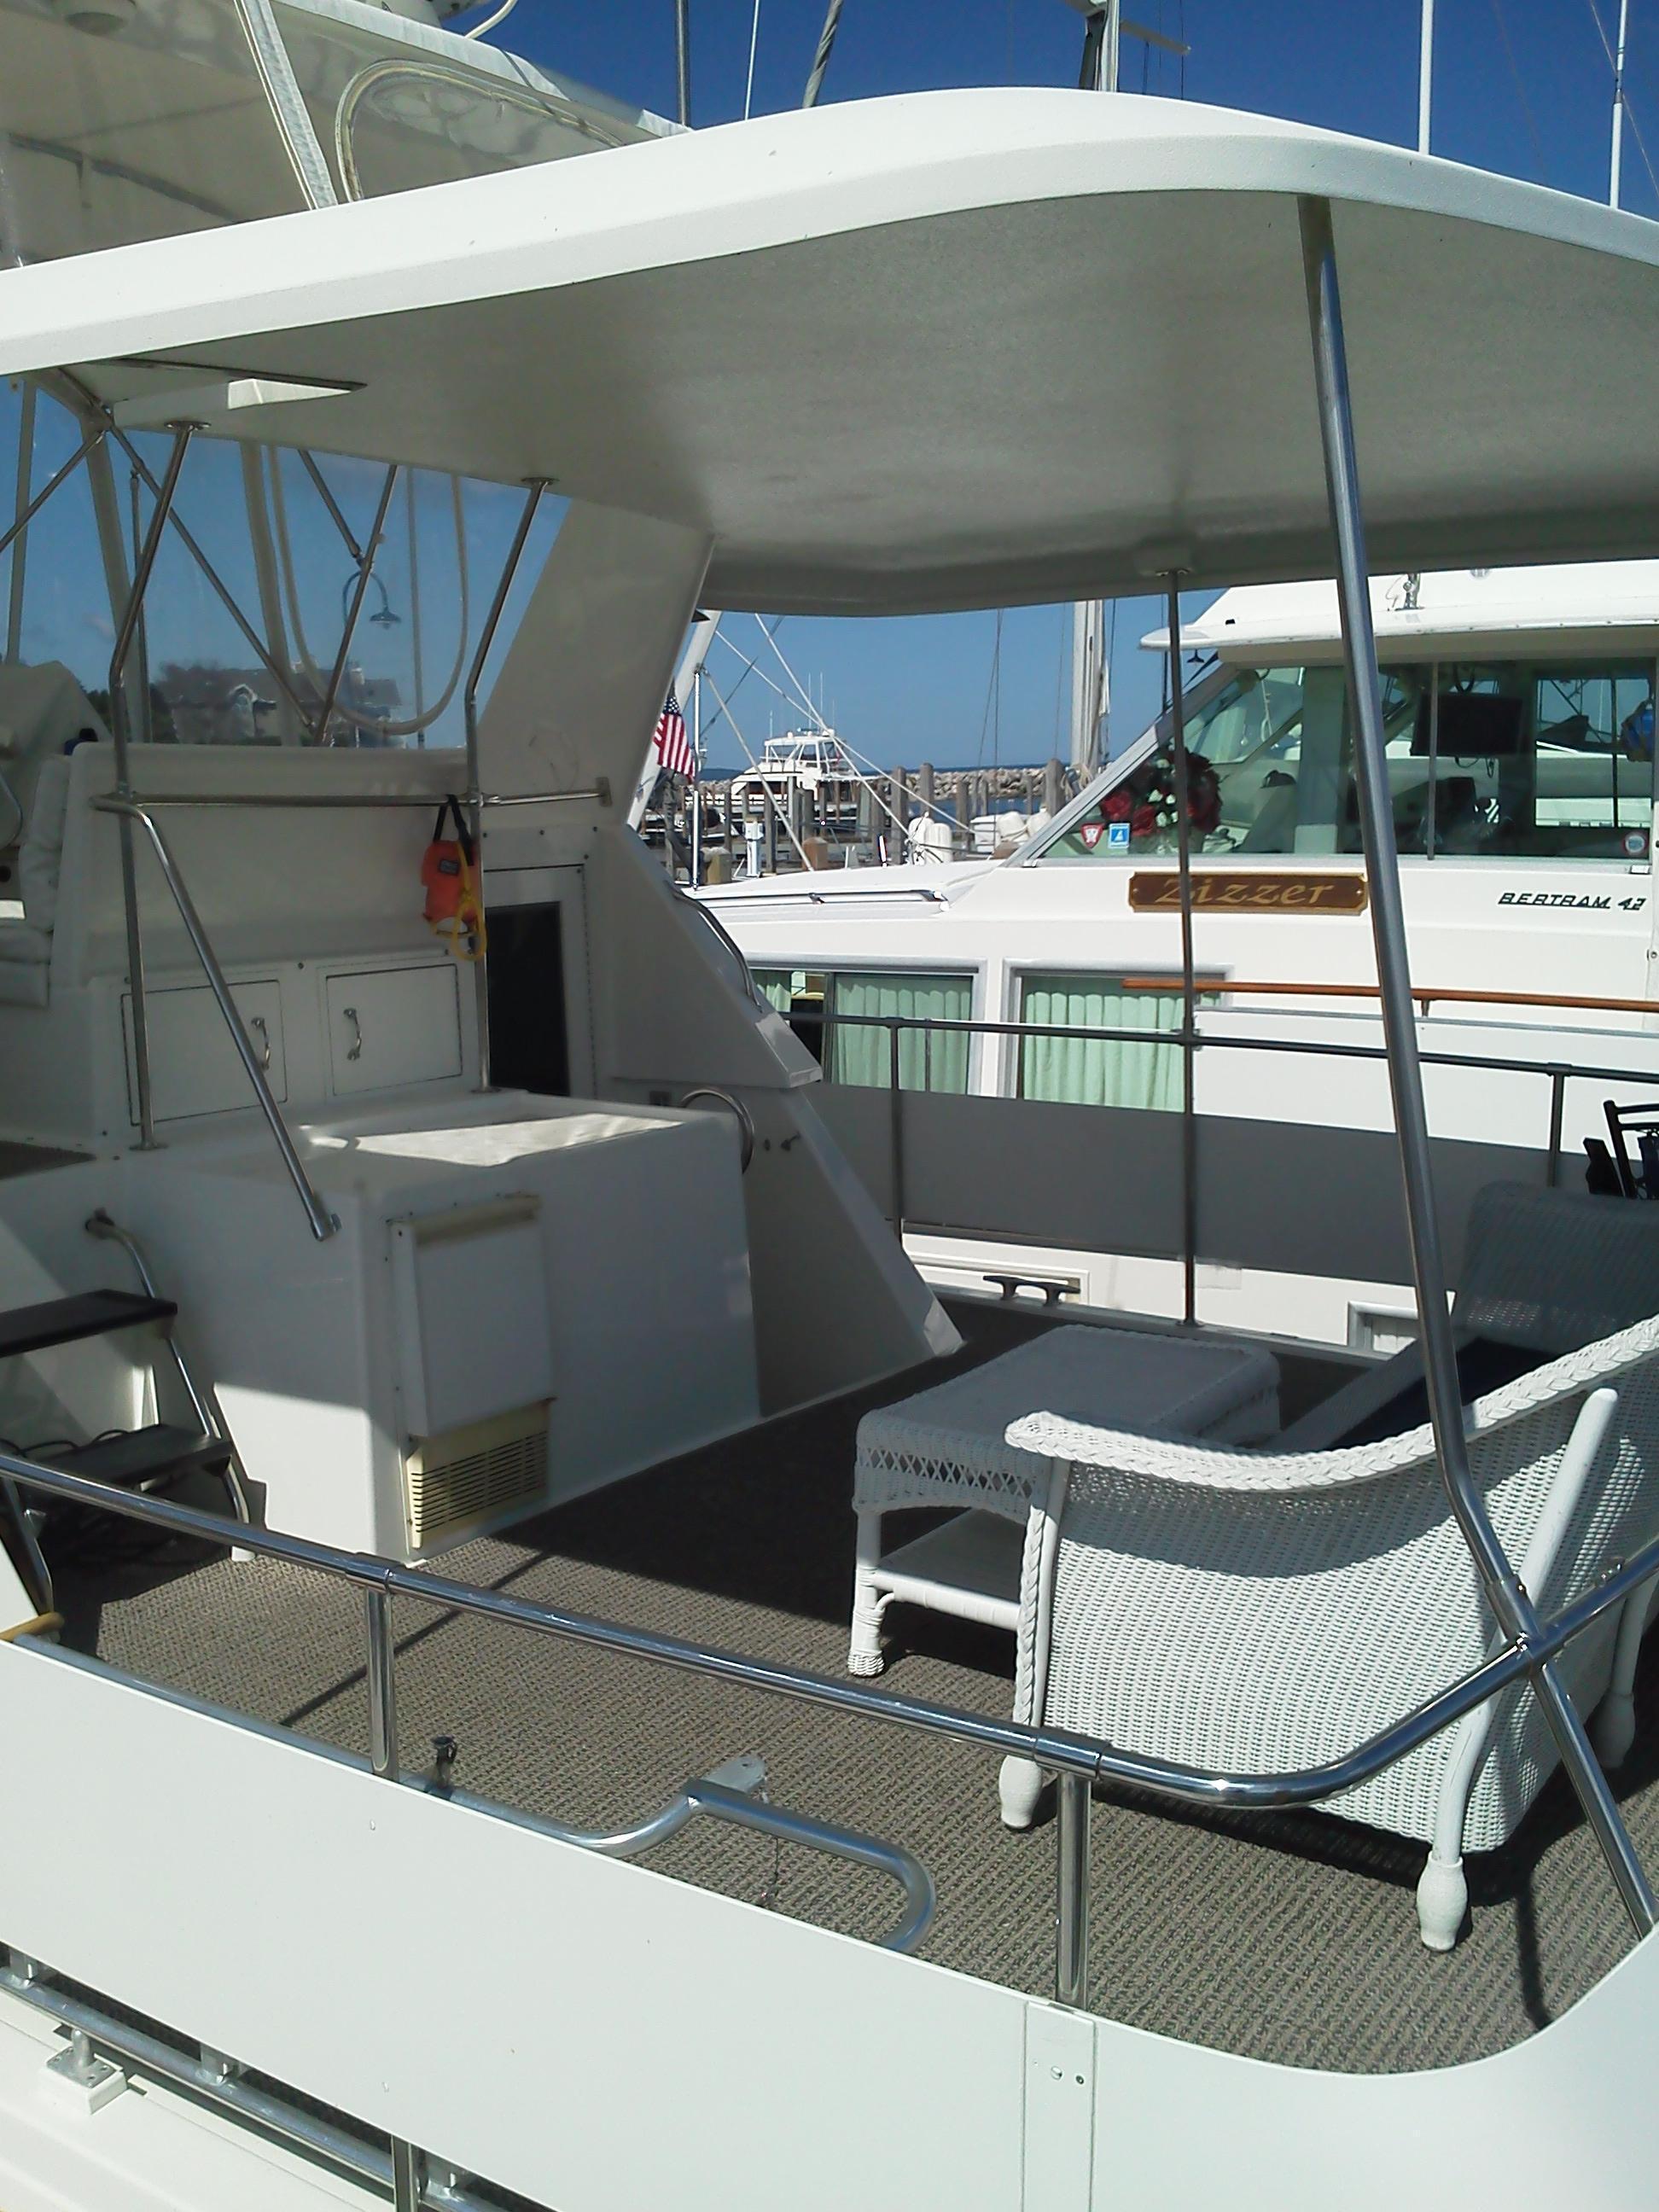 Hatteras Double Cabin Motor Yacht, Charlevoix